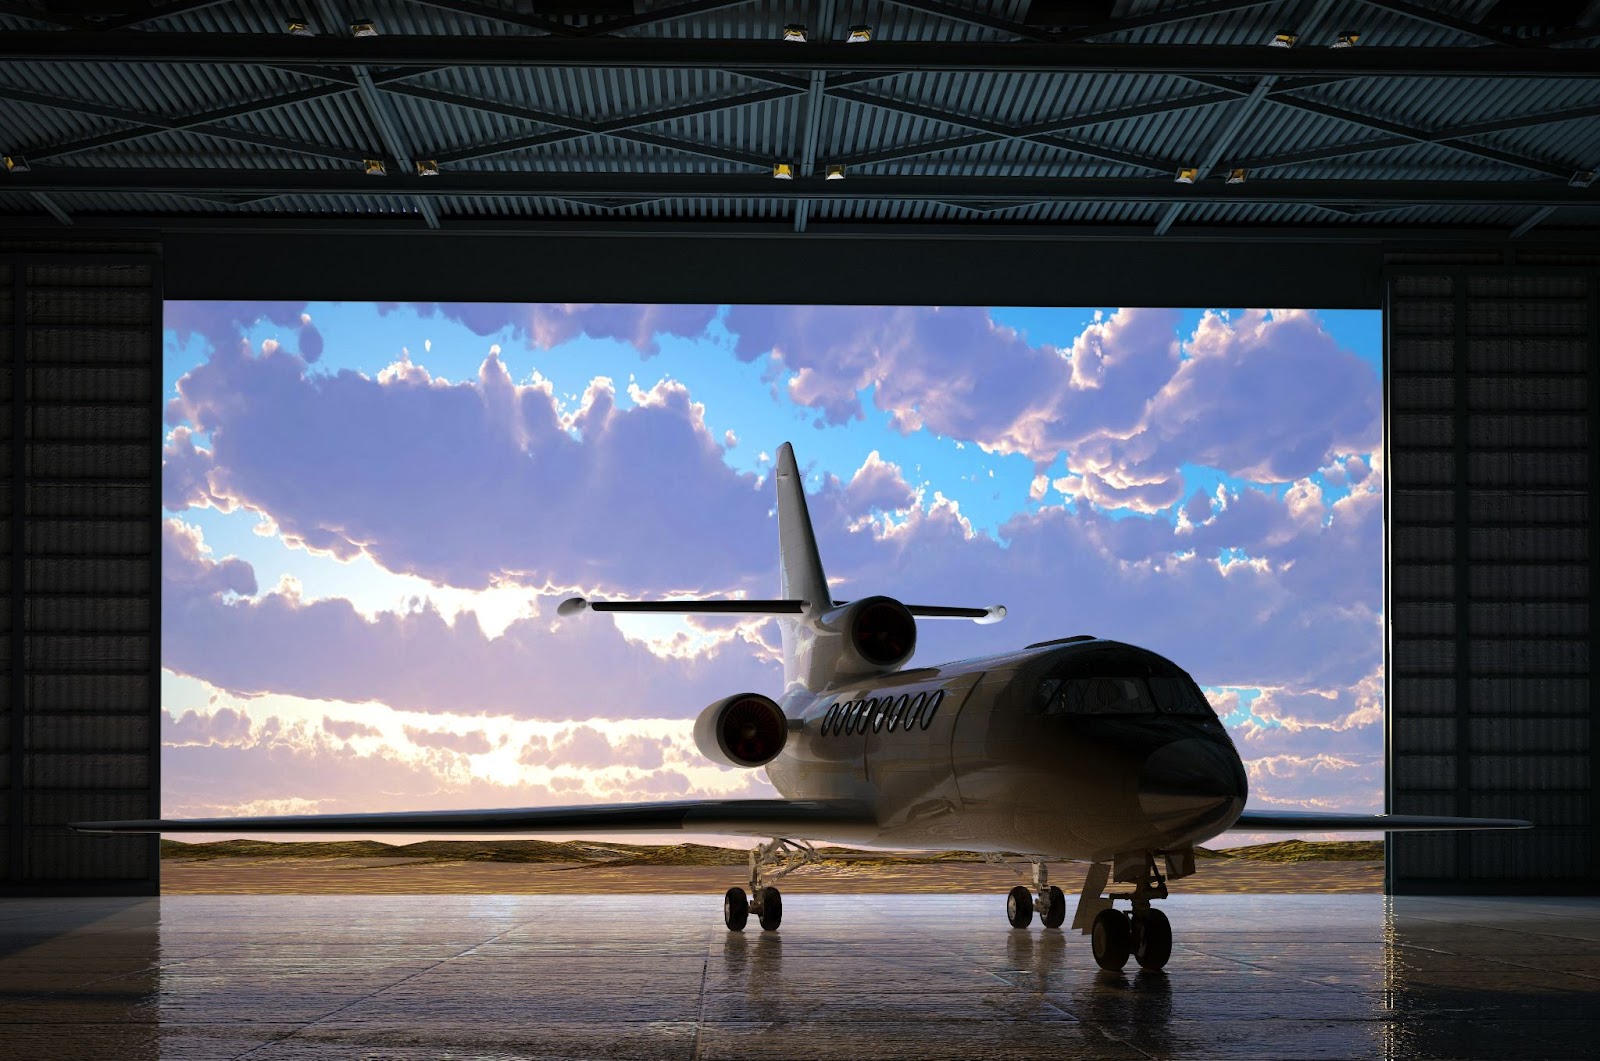 What Is Your Budget For Building Your Airplane Hangar?